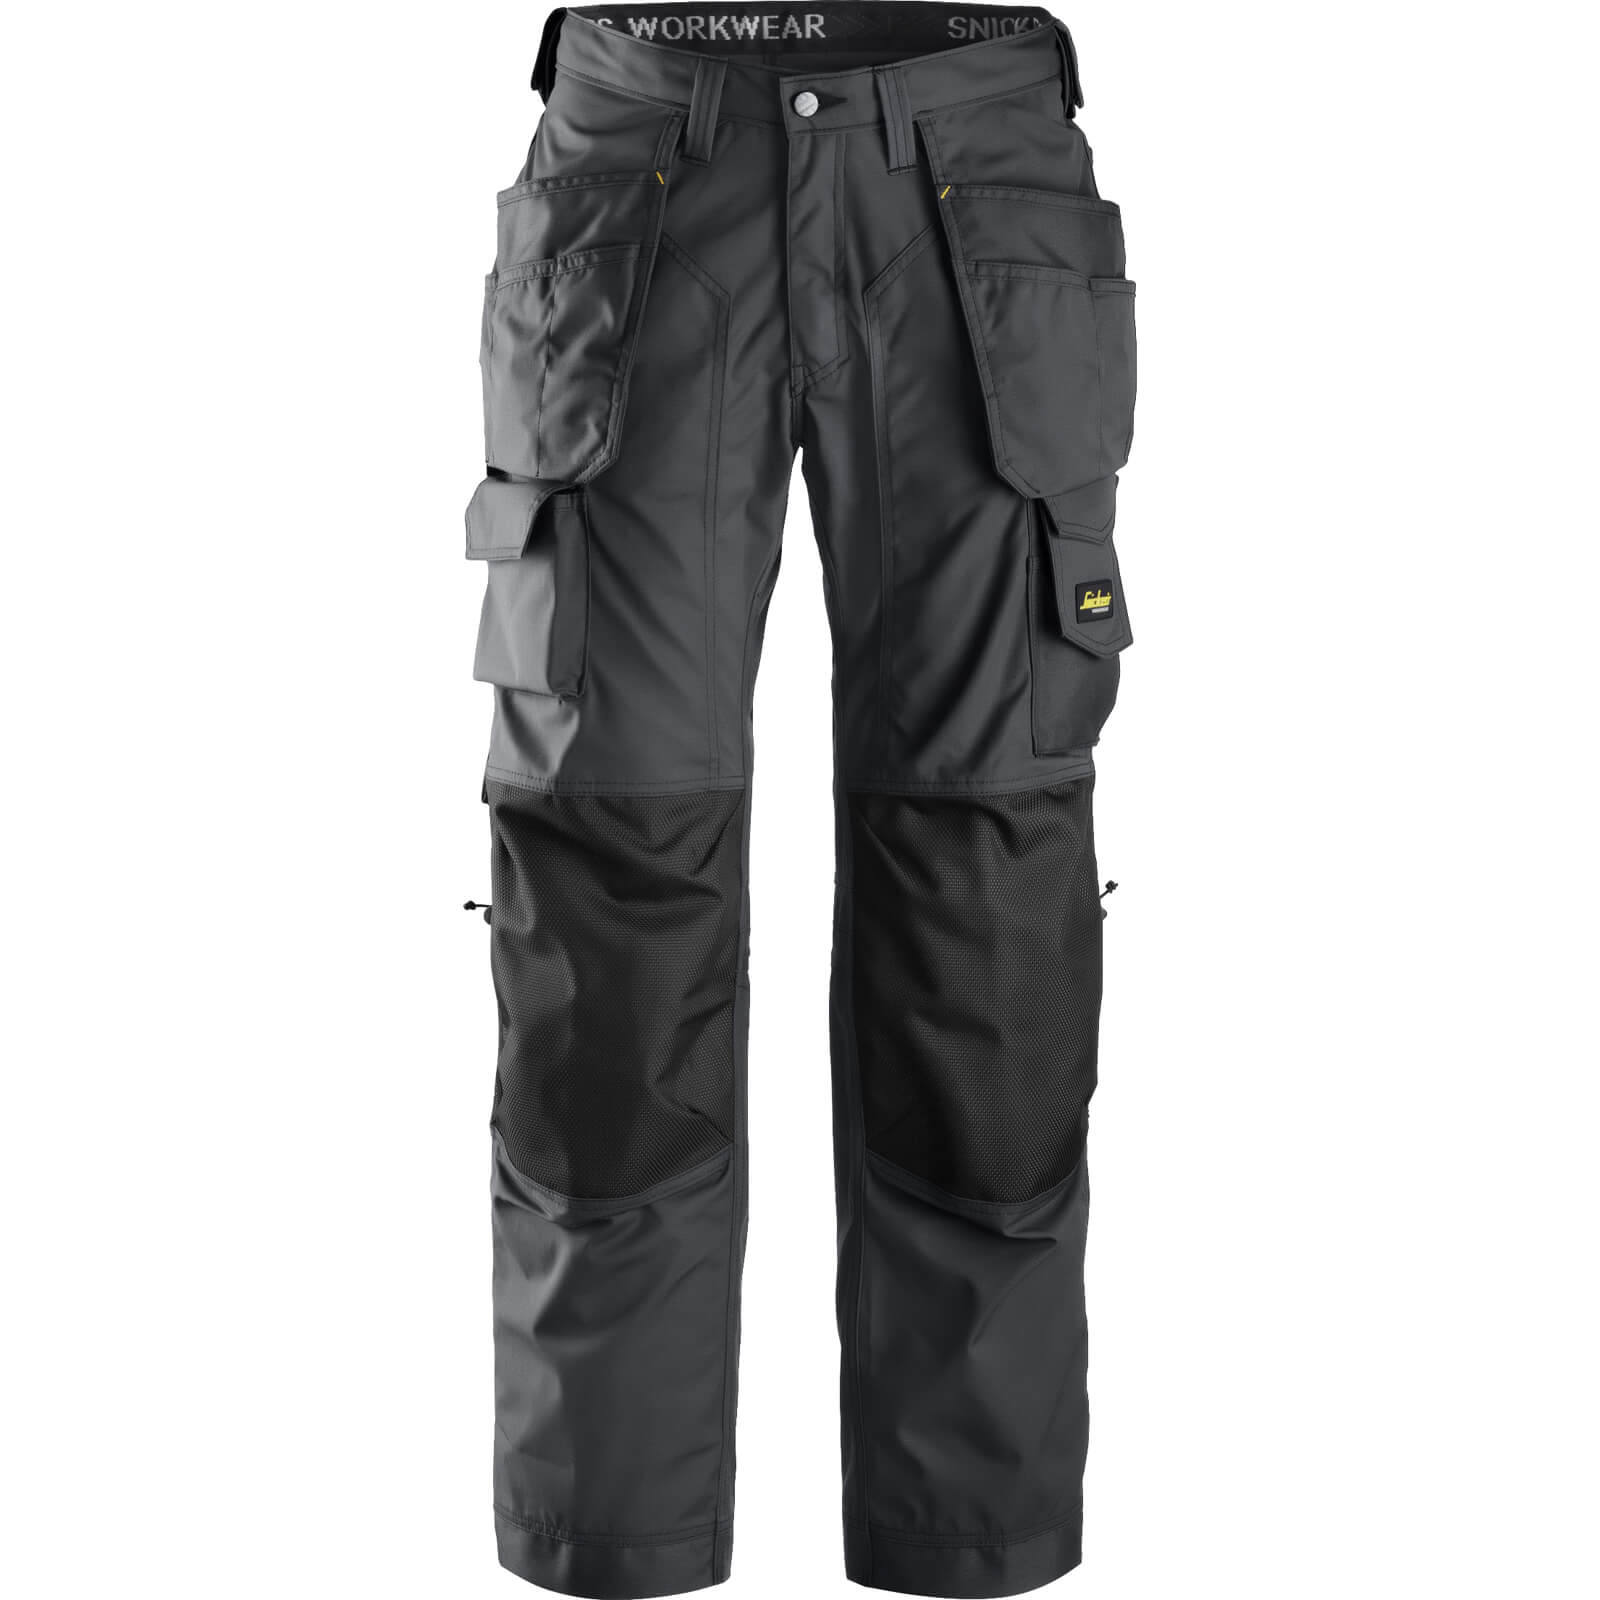 Image of Snickers 3223 Mens Rip Stop Floor Layer Work Trousers Black / Grey 33" 30"